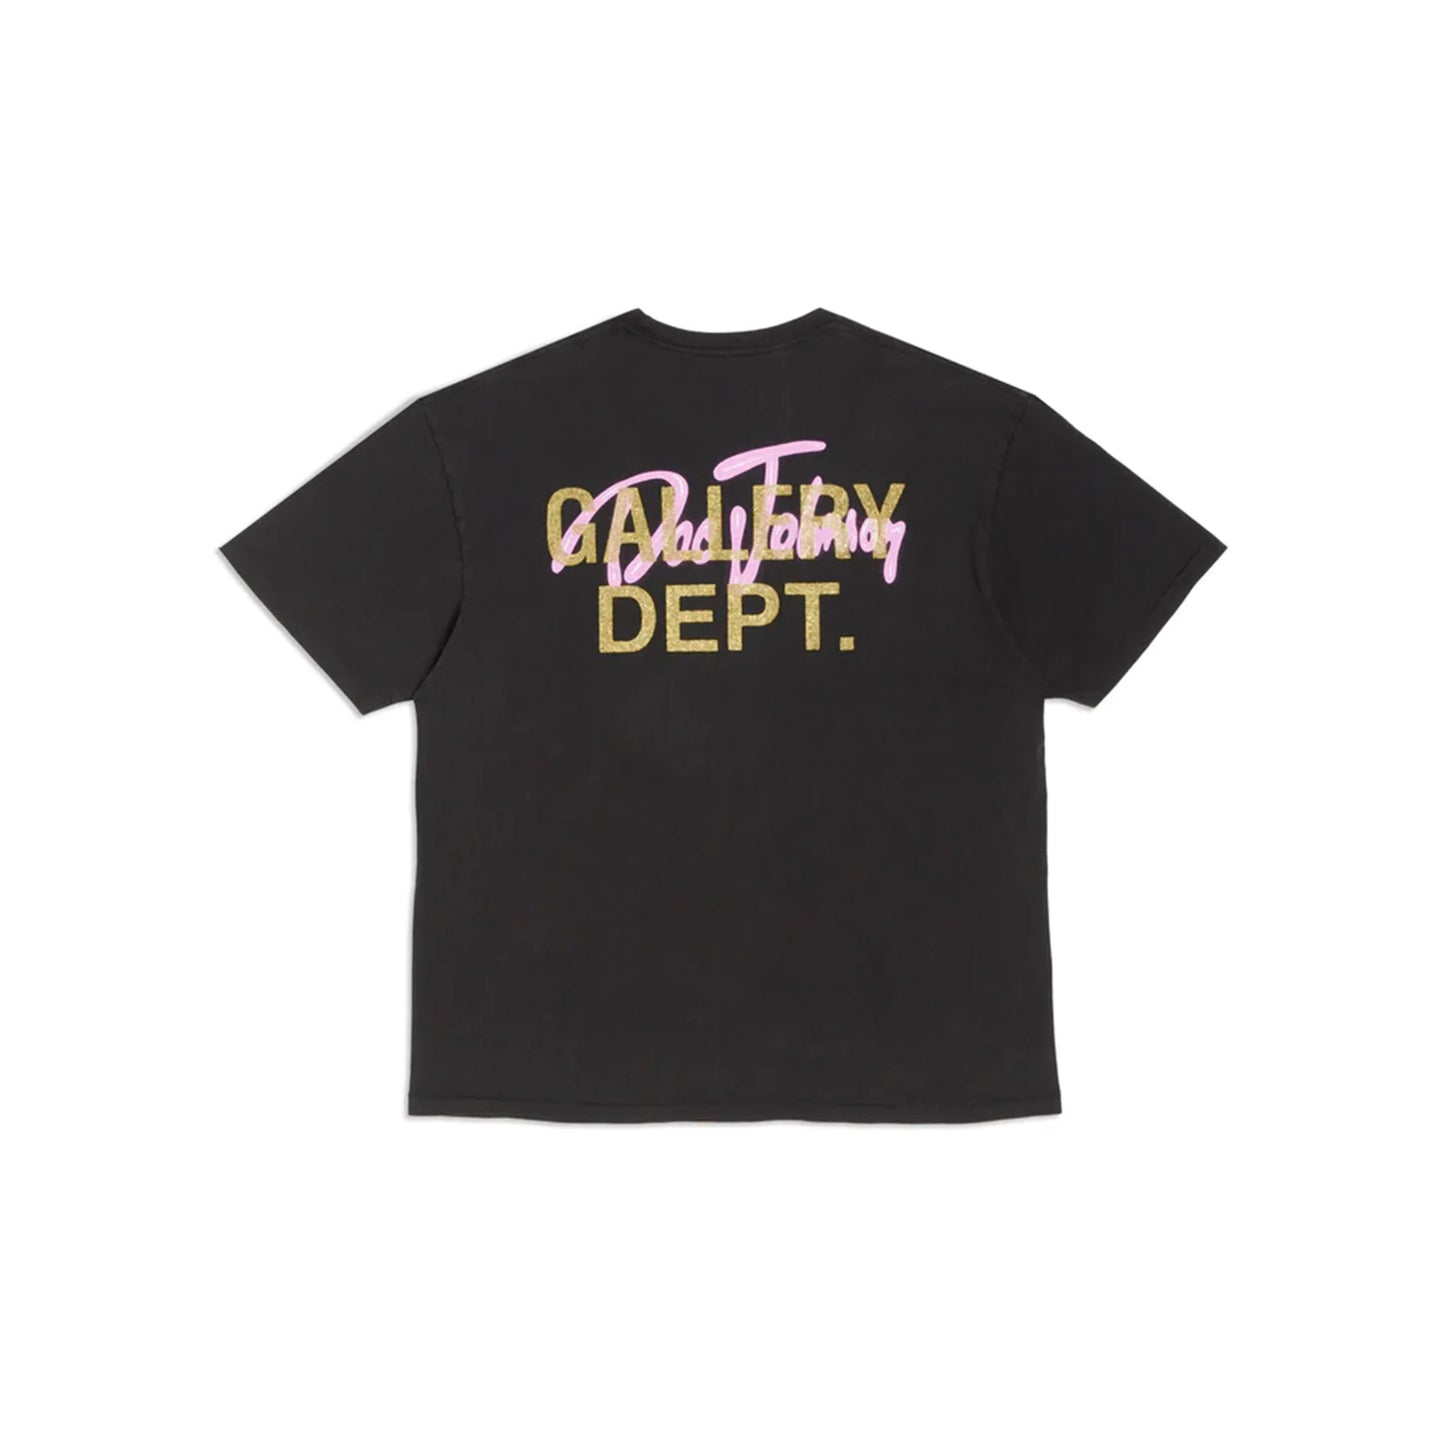 Gallery Dept. Body Cocktails T-Shirt